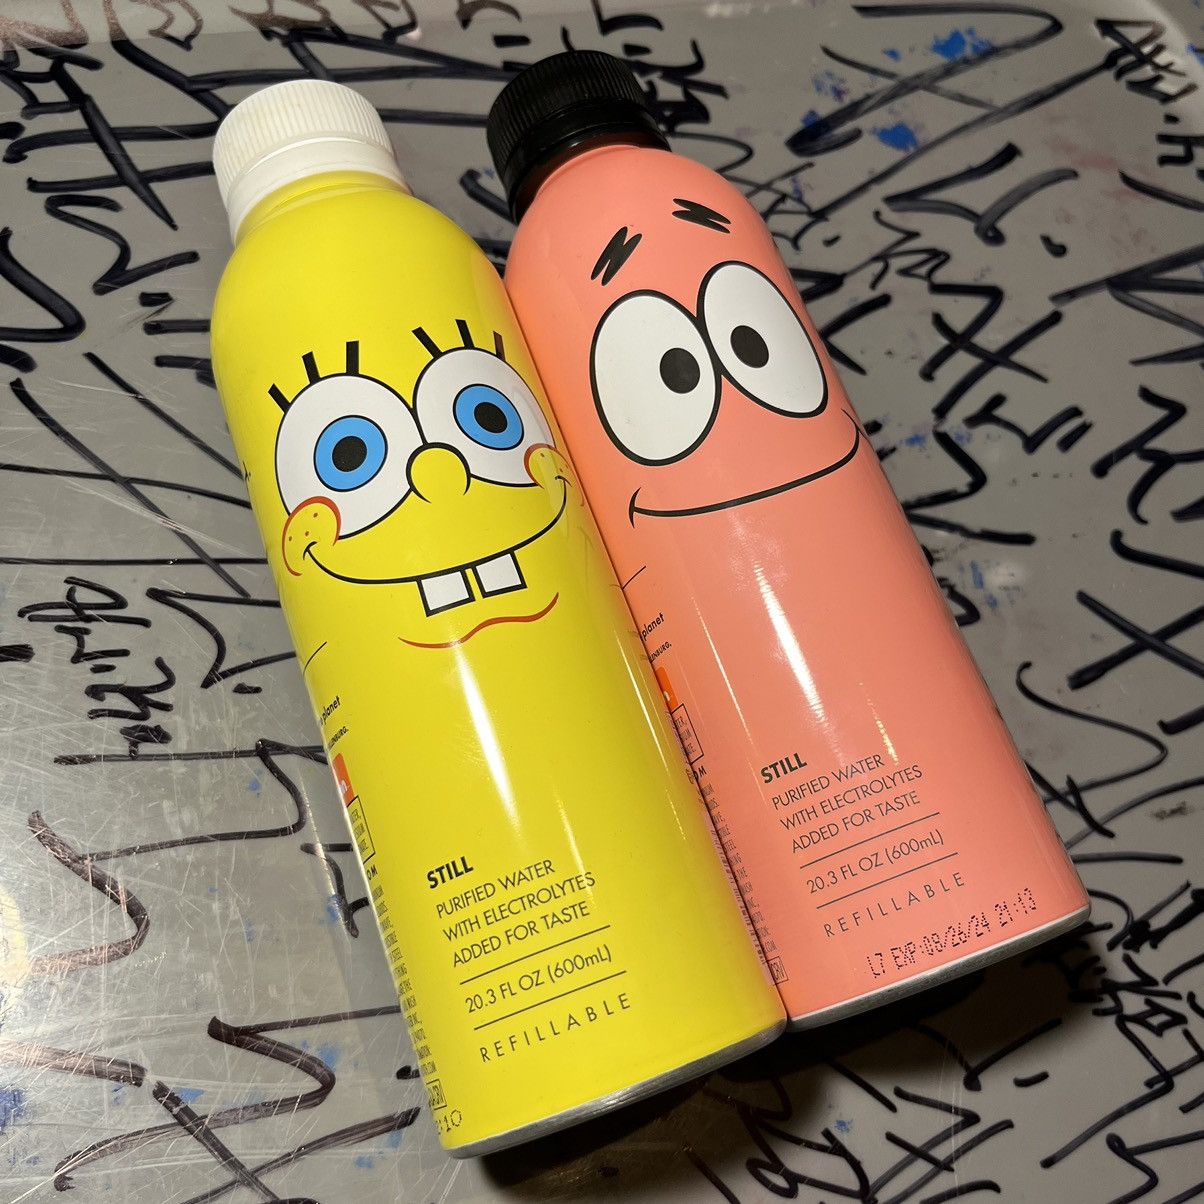 Set of 3 NEW SpongeBob Path Water Special Edition Refillable Bottles RARE!